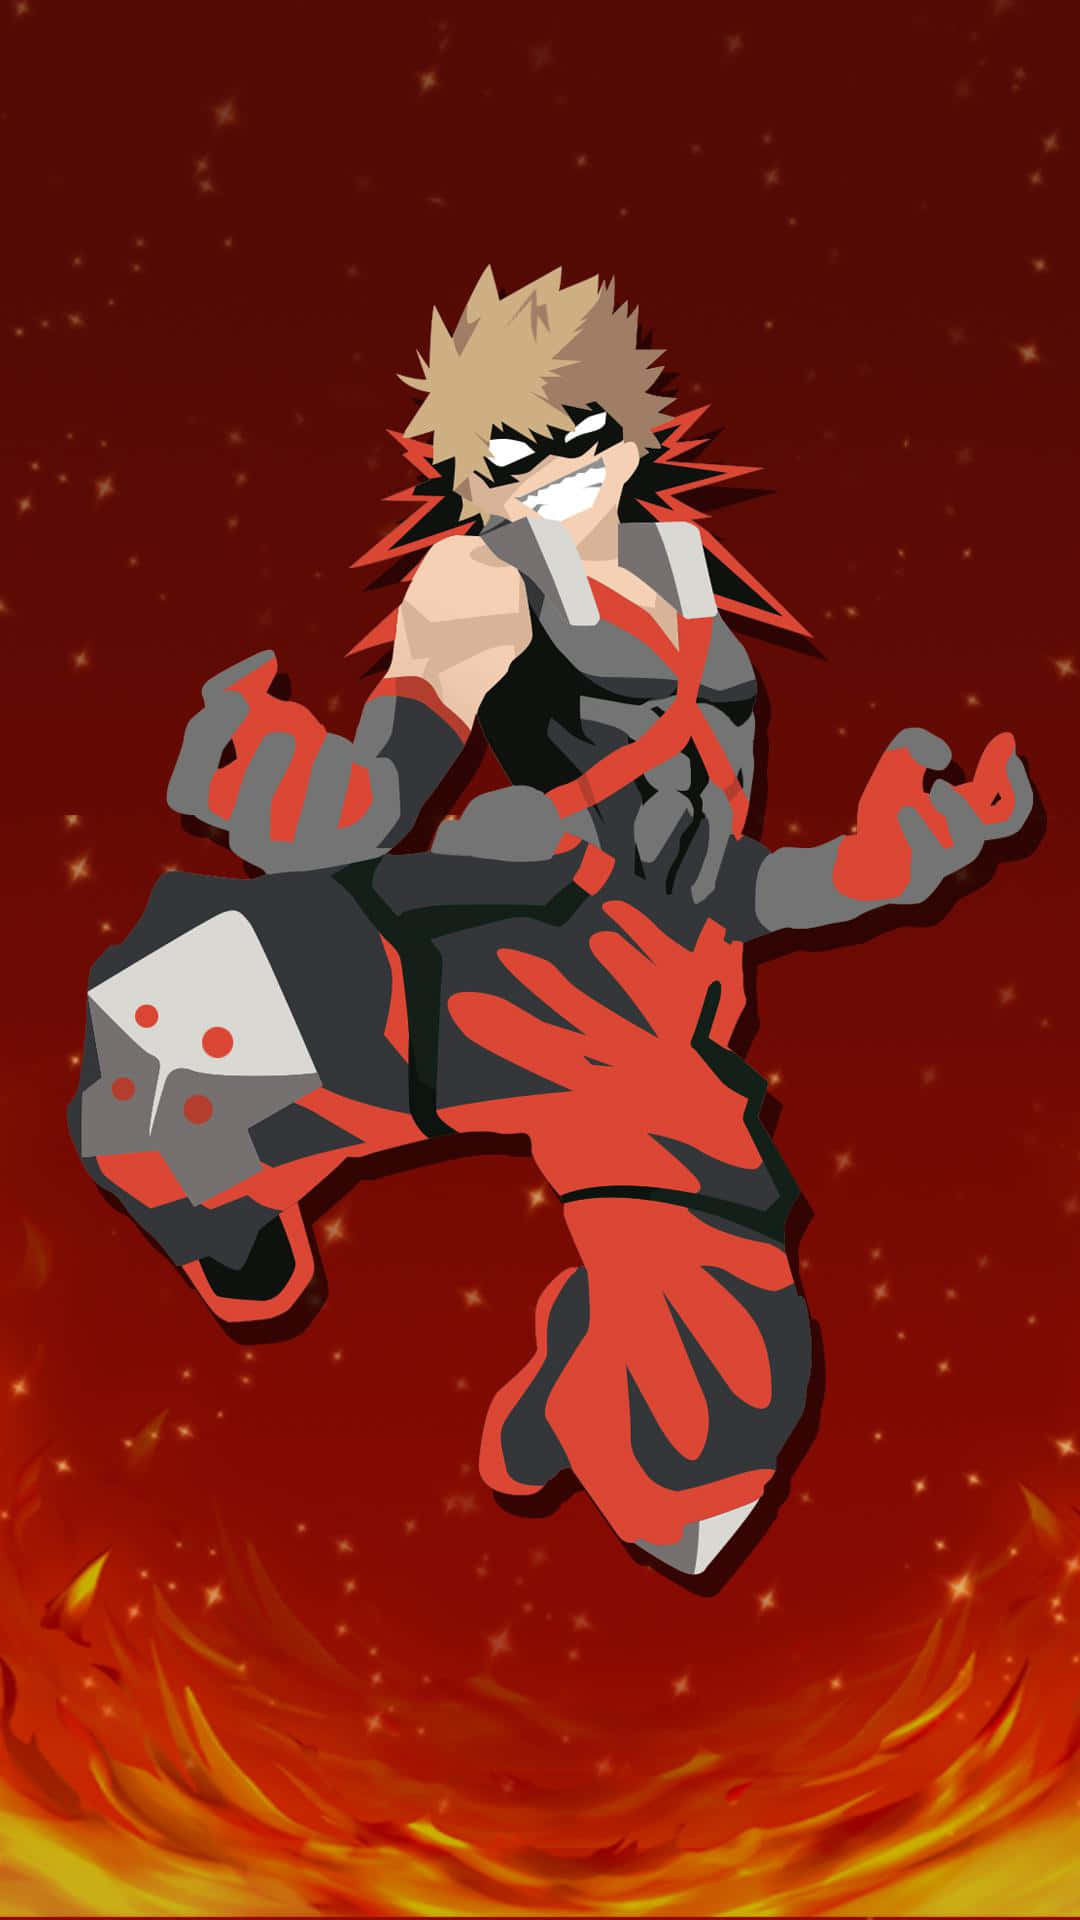 A Character In A Red Outfit Jumping In The Air Wallpaper